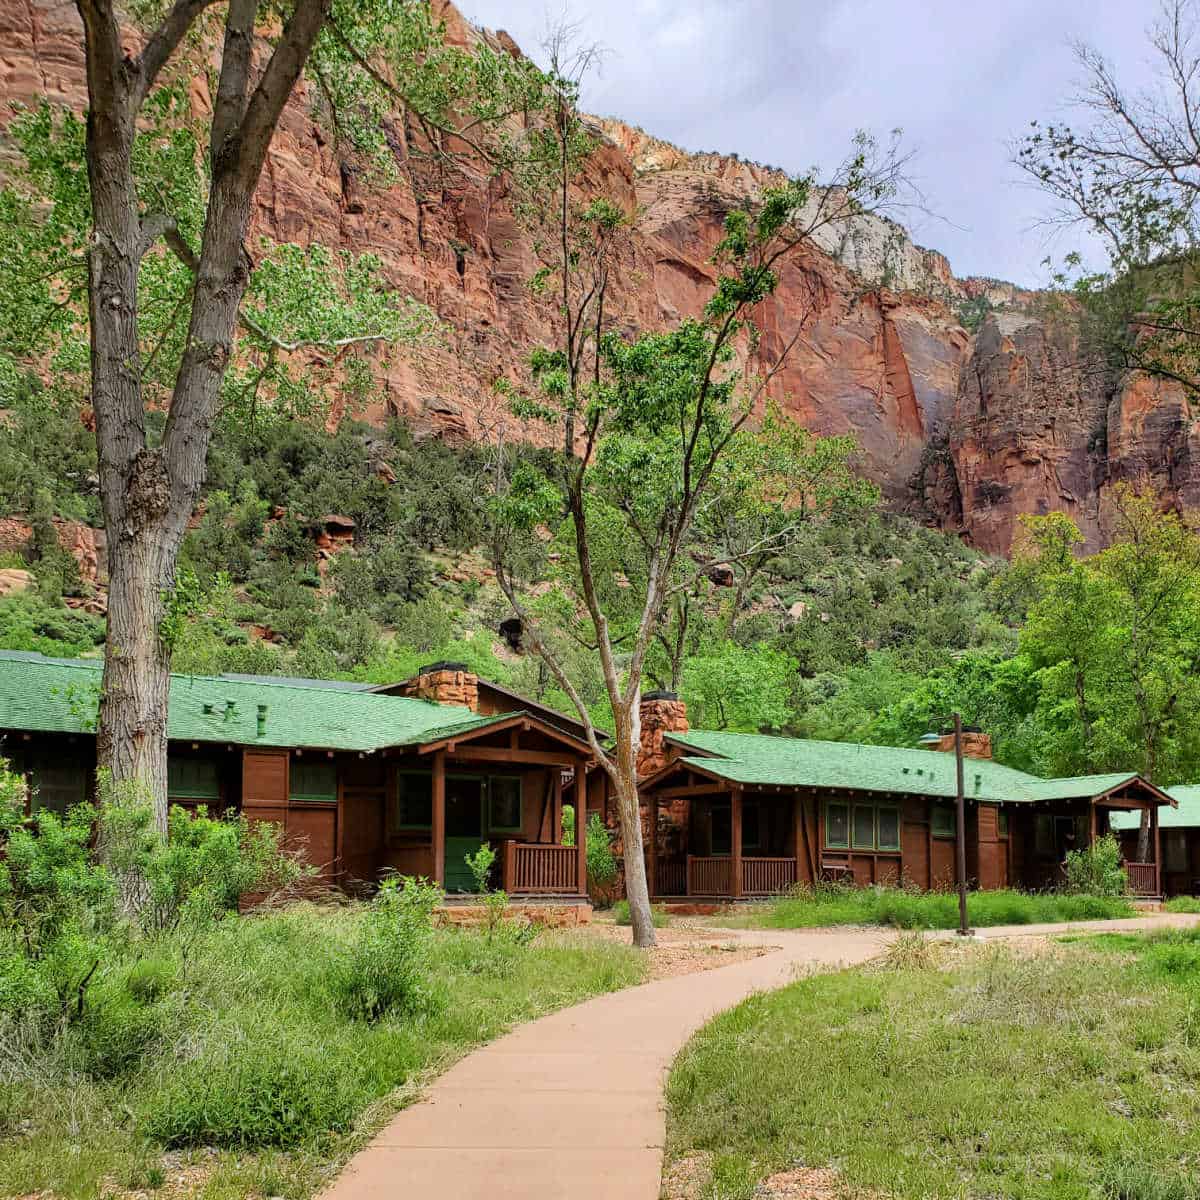 Zion National Park Cabins in Utah